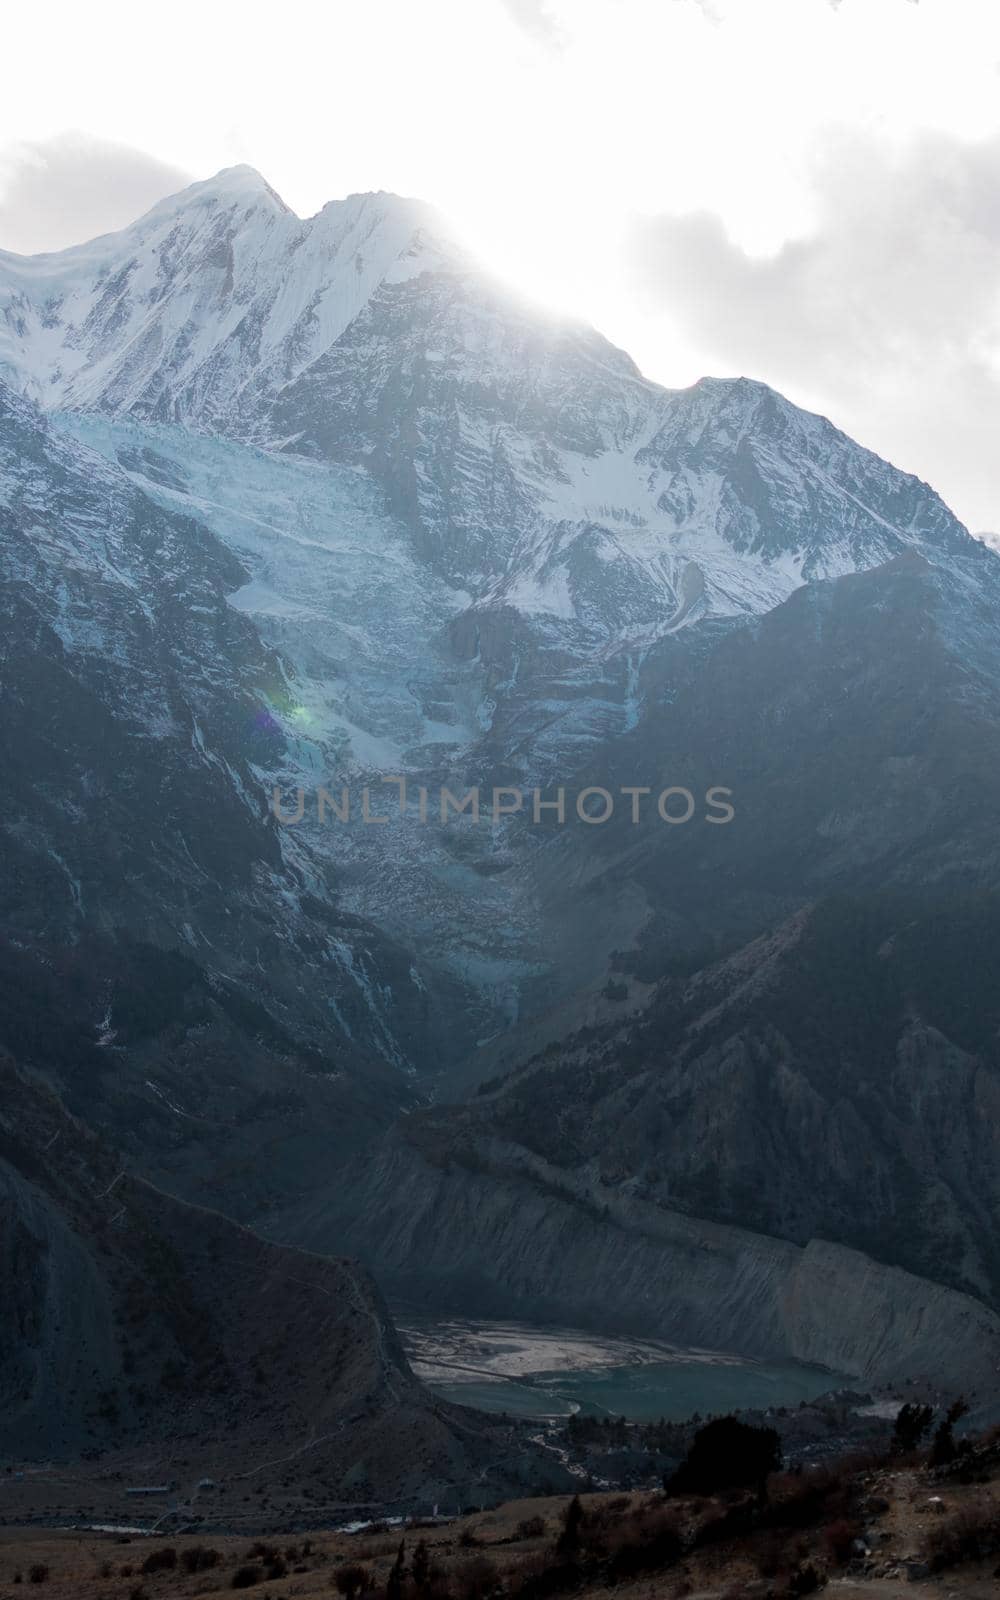 Panorama of mountain glacier over Manang village by arvidnorberg